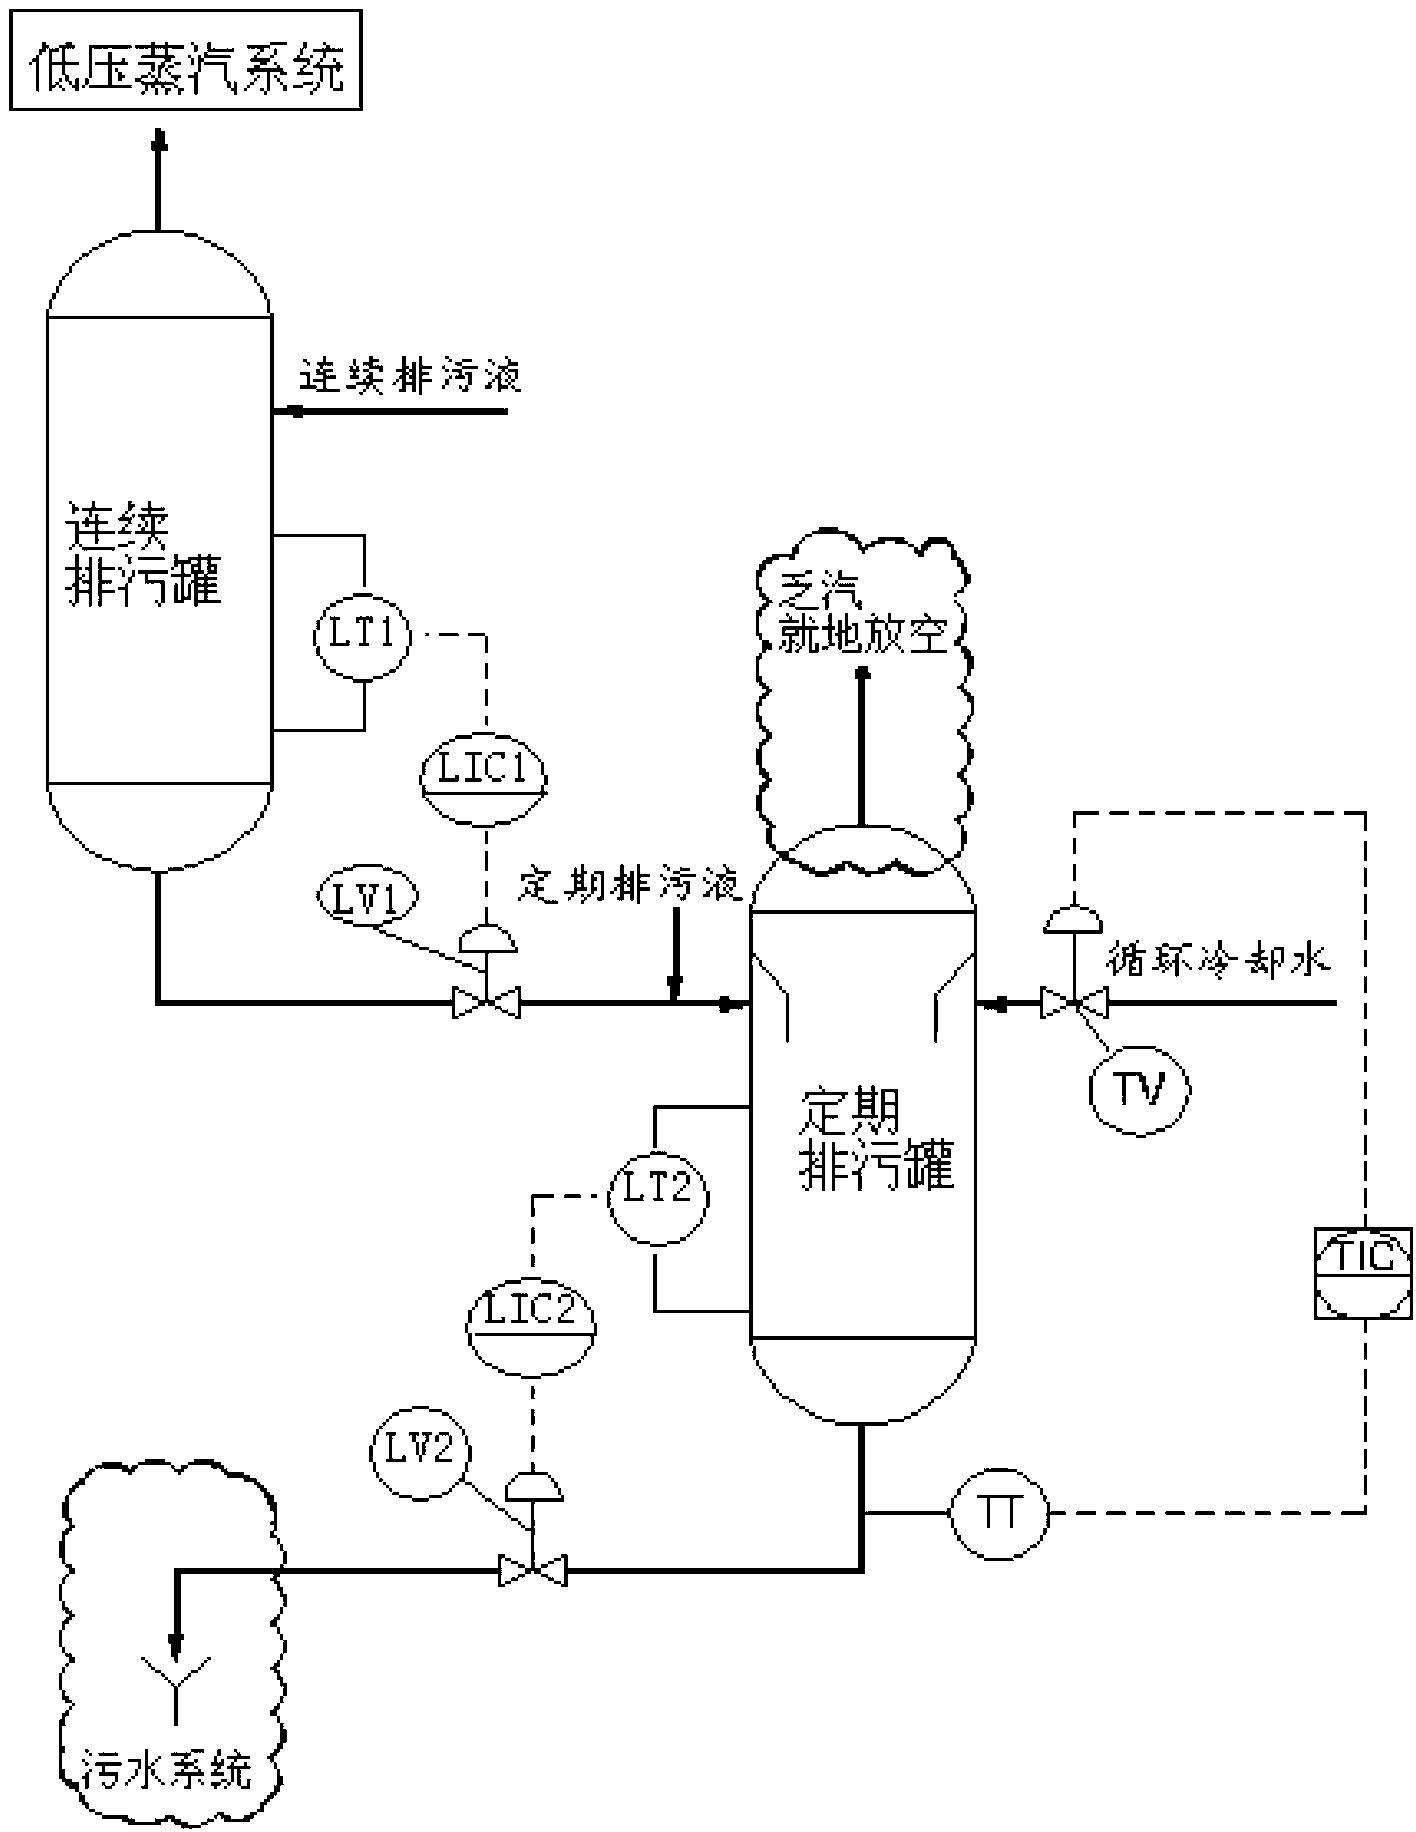 Boiler blow down system